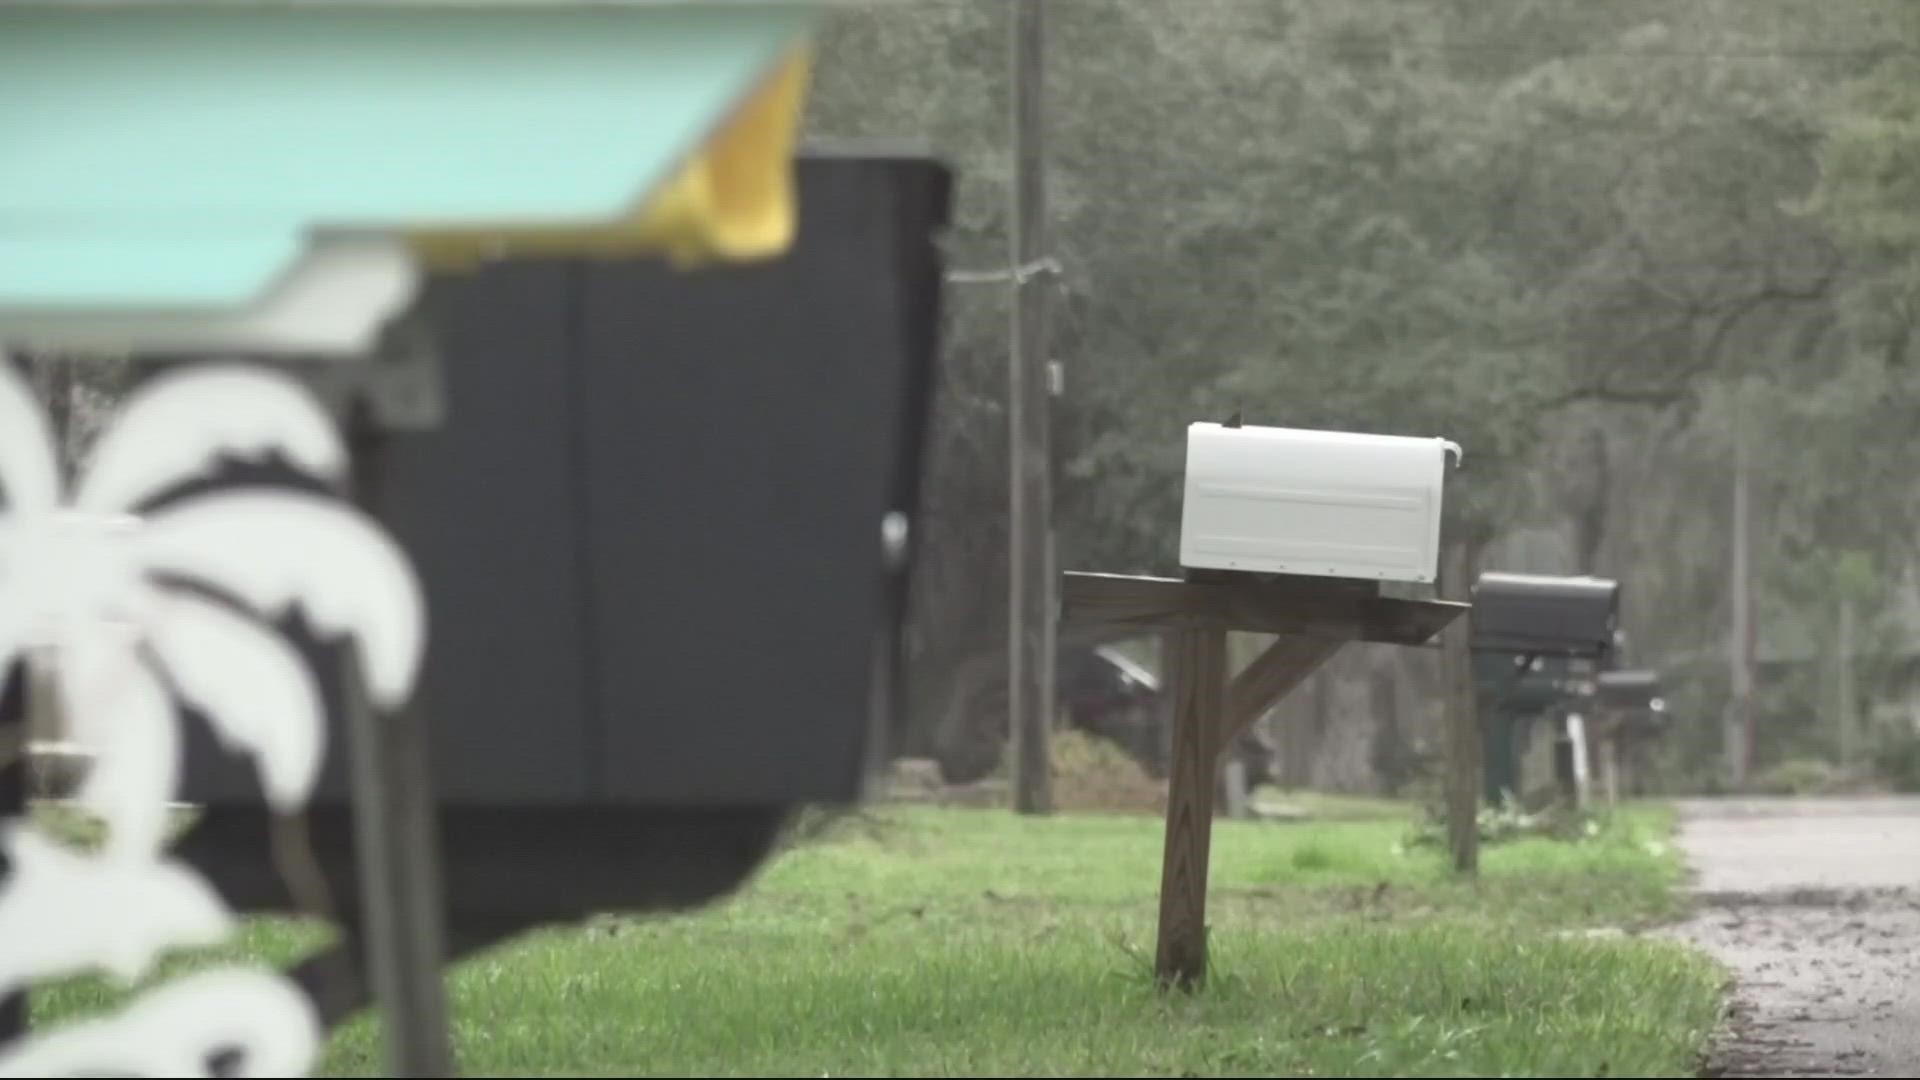 Mail theft is an issue, even in St. Johns County.